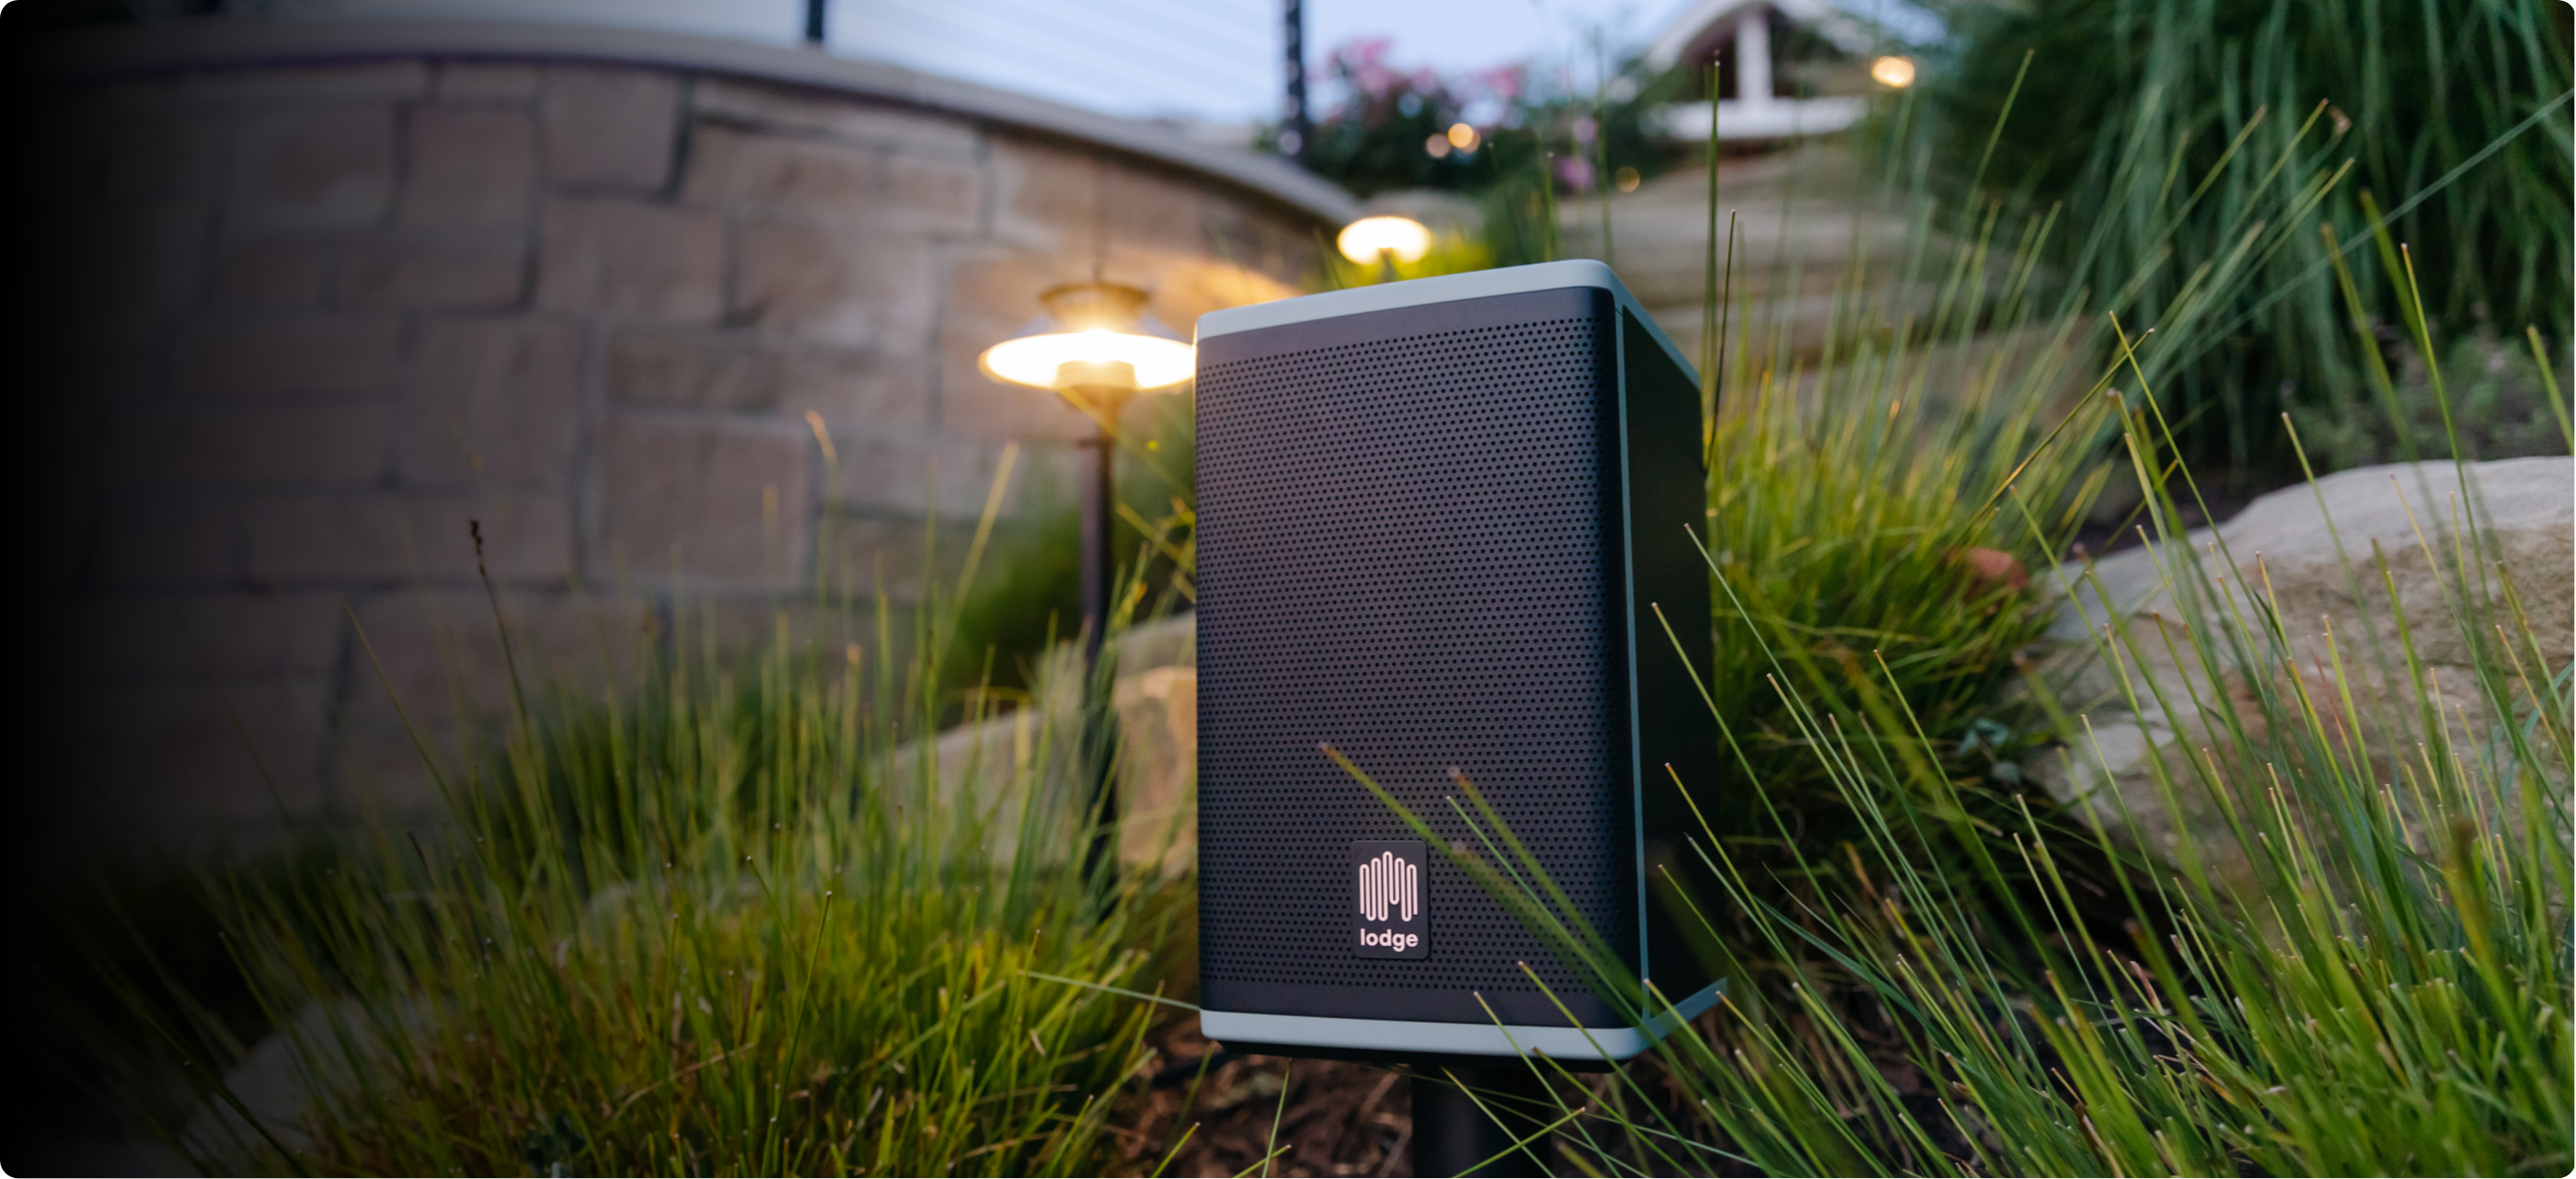 Forbes Reviews the Game-Changing lodge Solar Speaker 4 Series 2